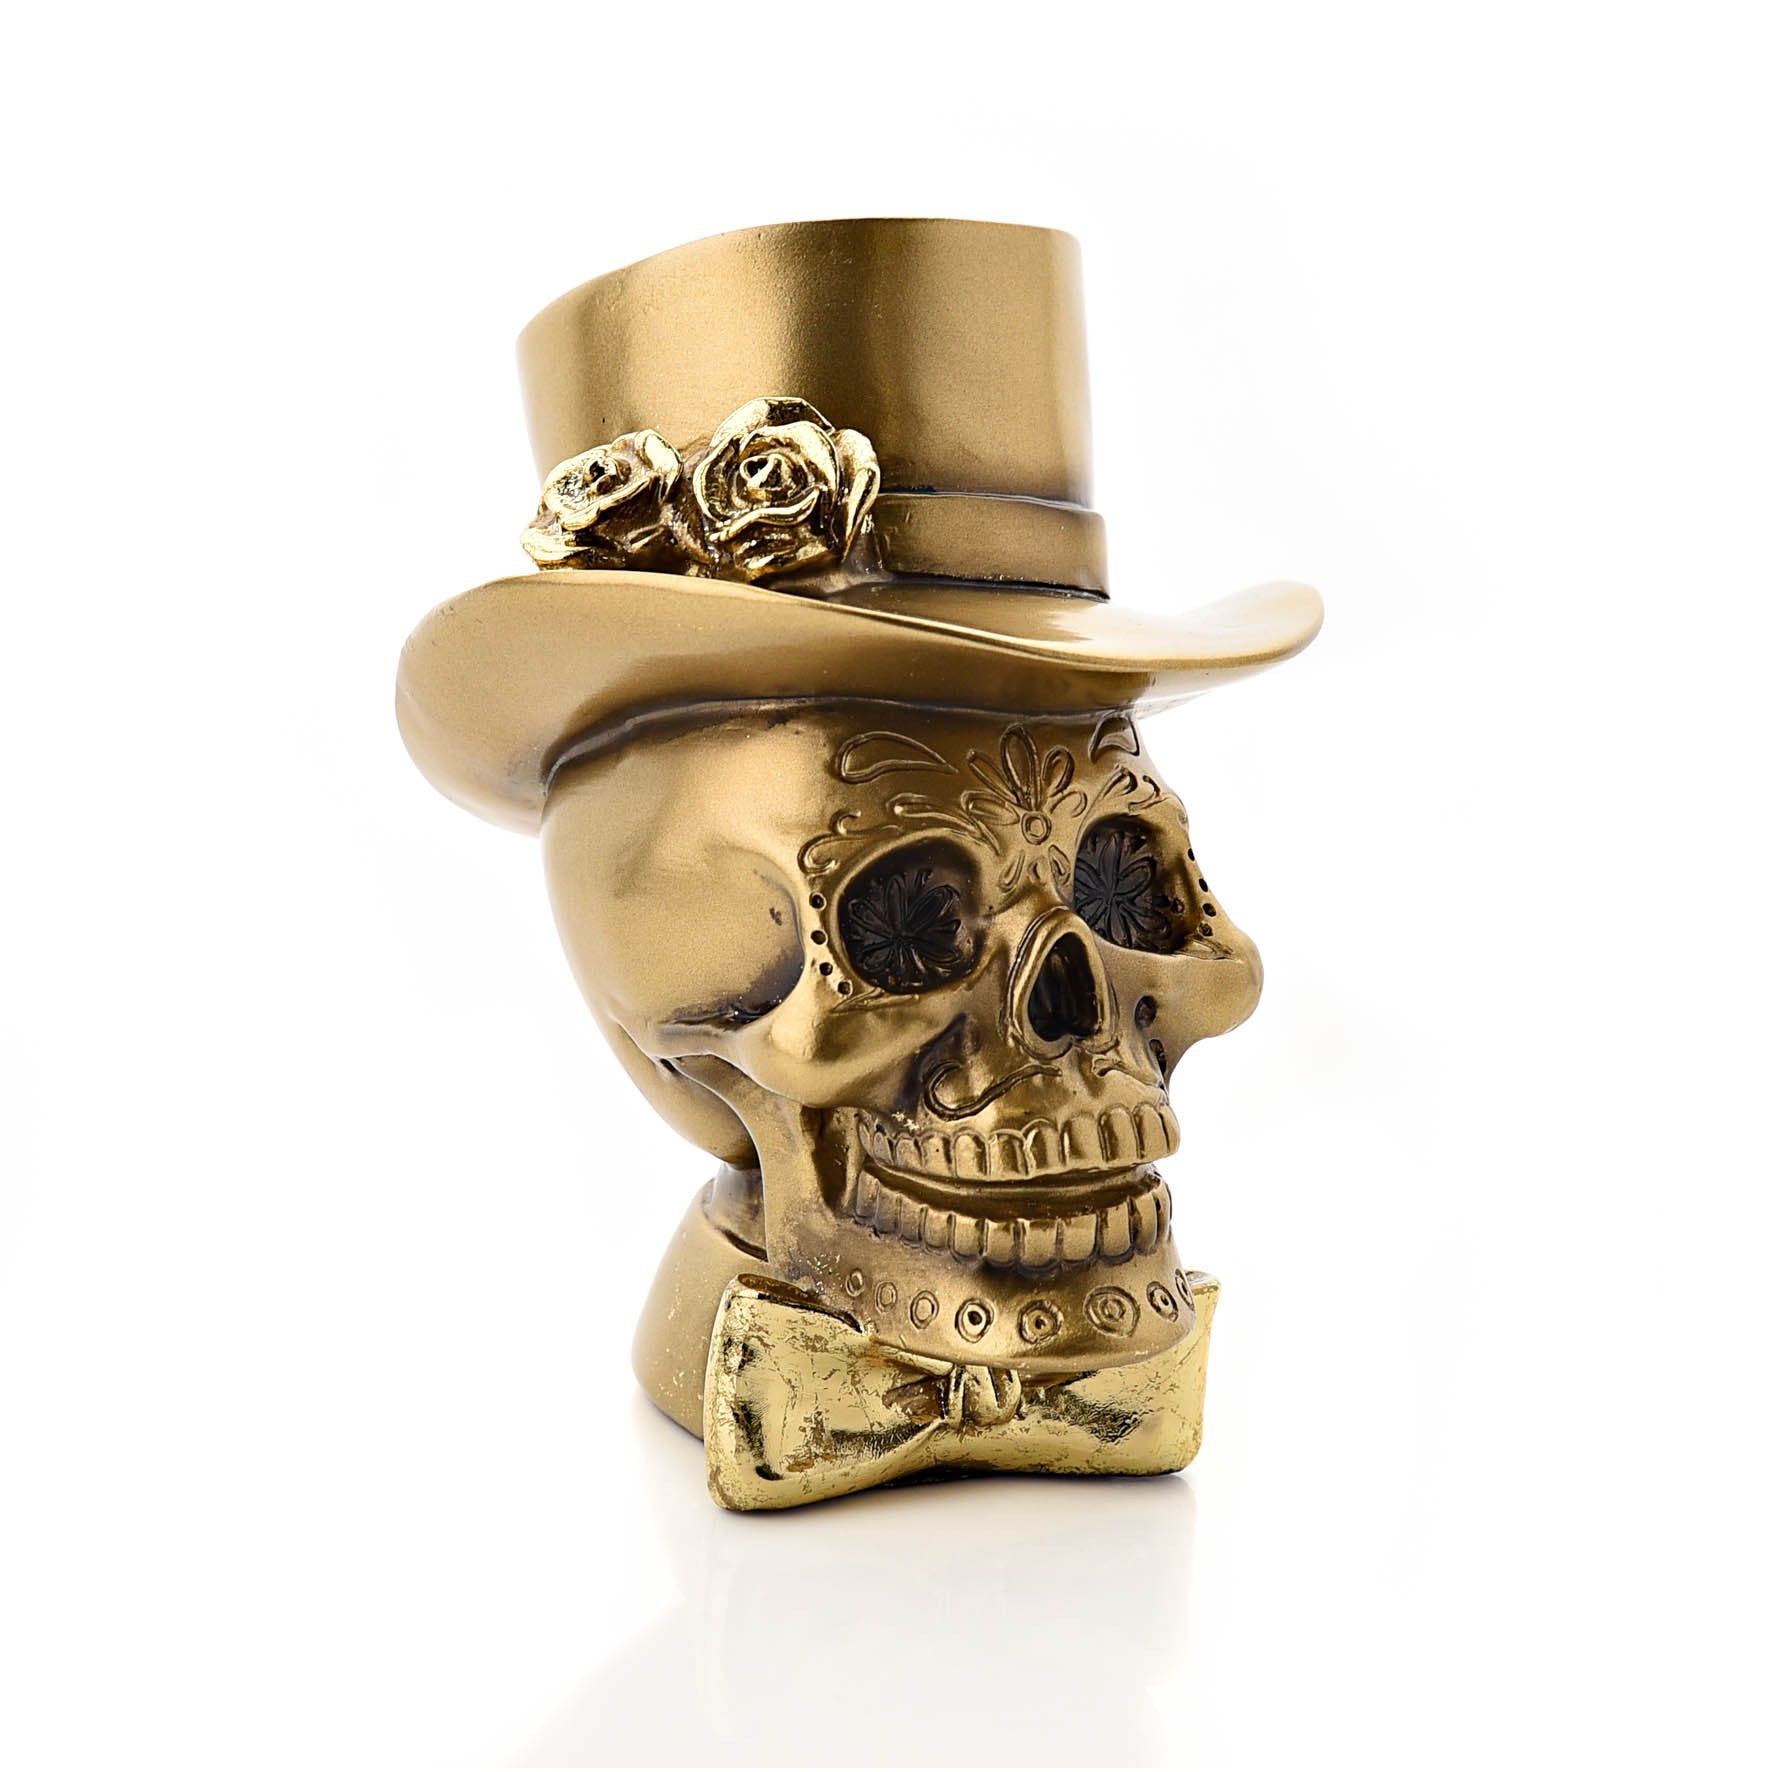 View Gold Skull with Top Hat Resin Figurine information